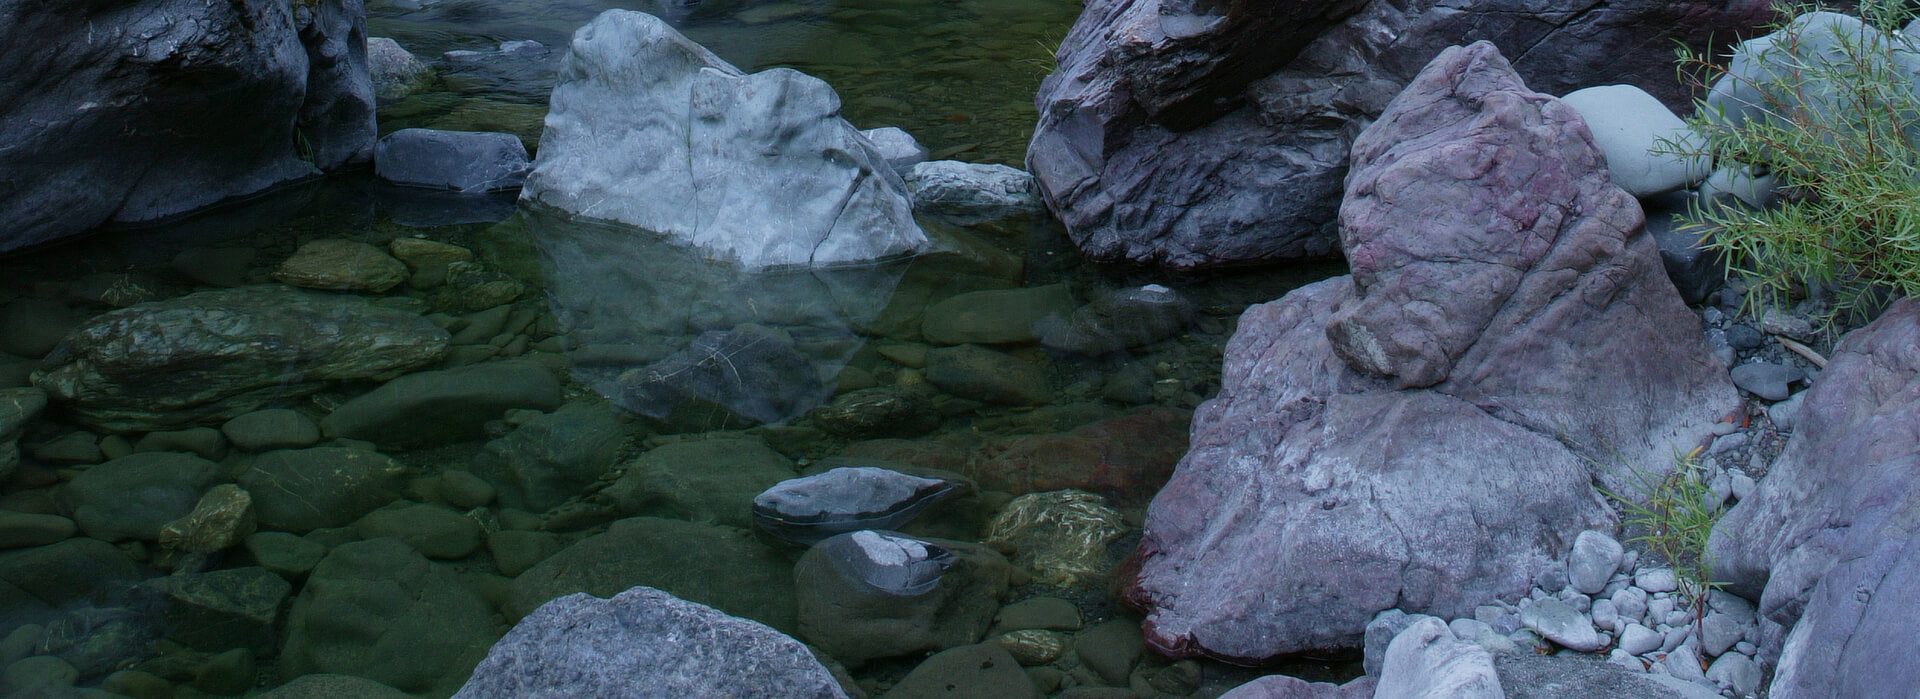 Plants and colored rocks amid clear water in riverbed, Trinity Mountain wilderness, California.